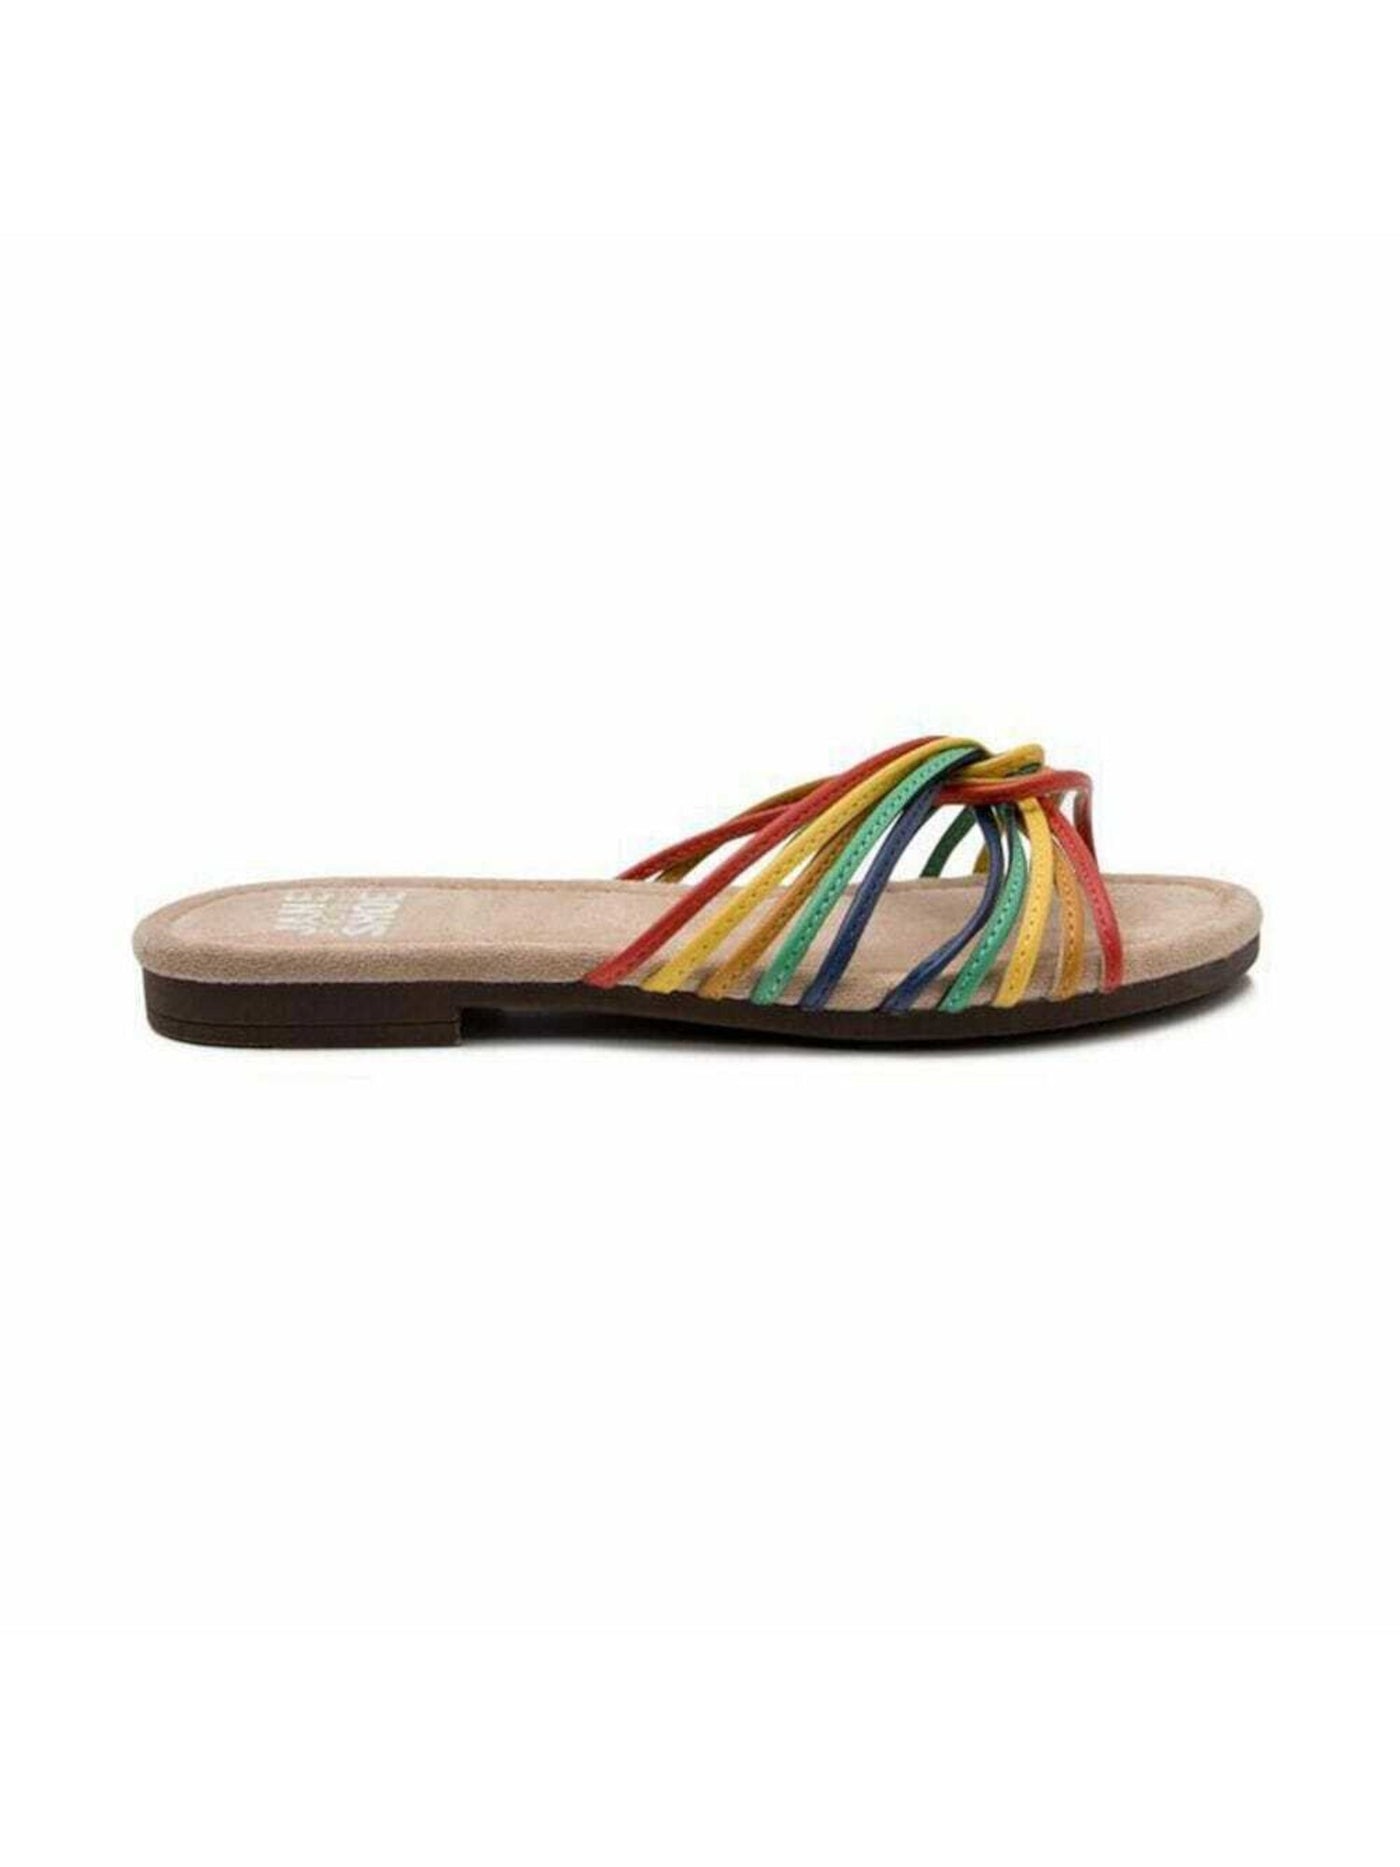 JANE AND THE SHOE Womens Beige Rainbow Cushioned Strappy Hallie Open Toe Slip On Slide Sandals Shoes